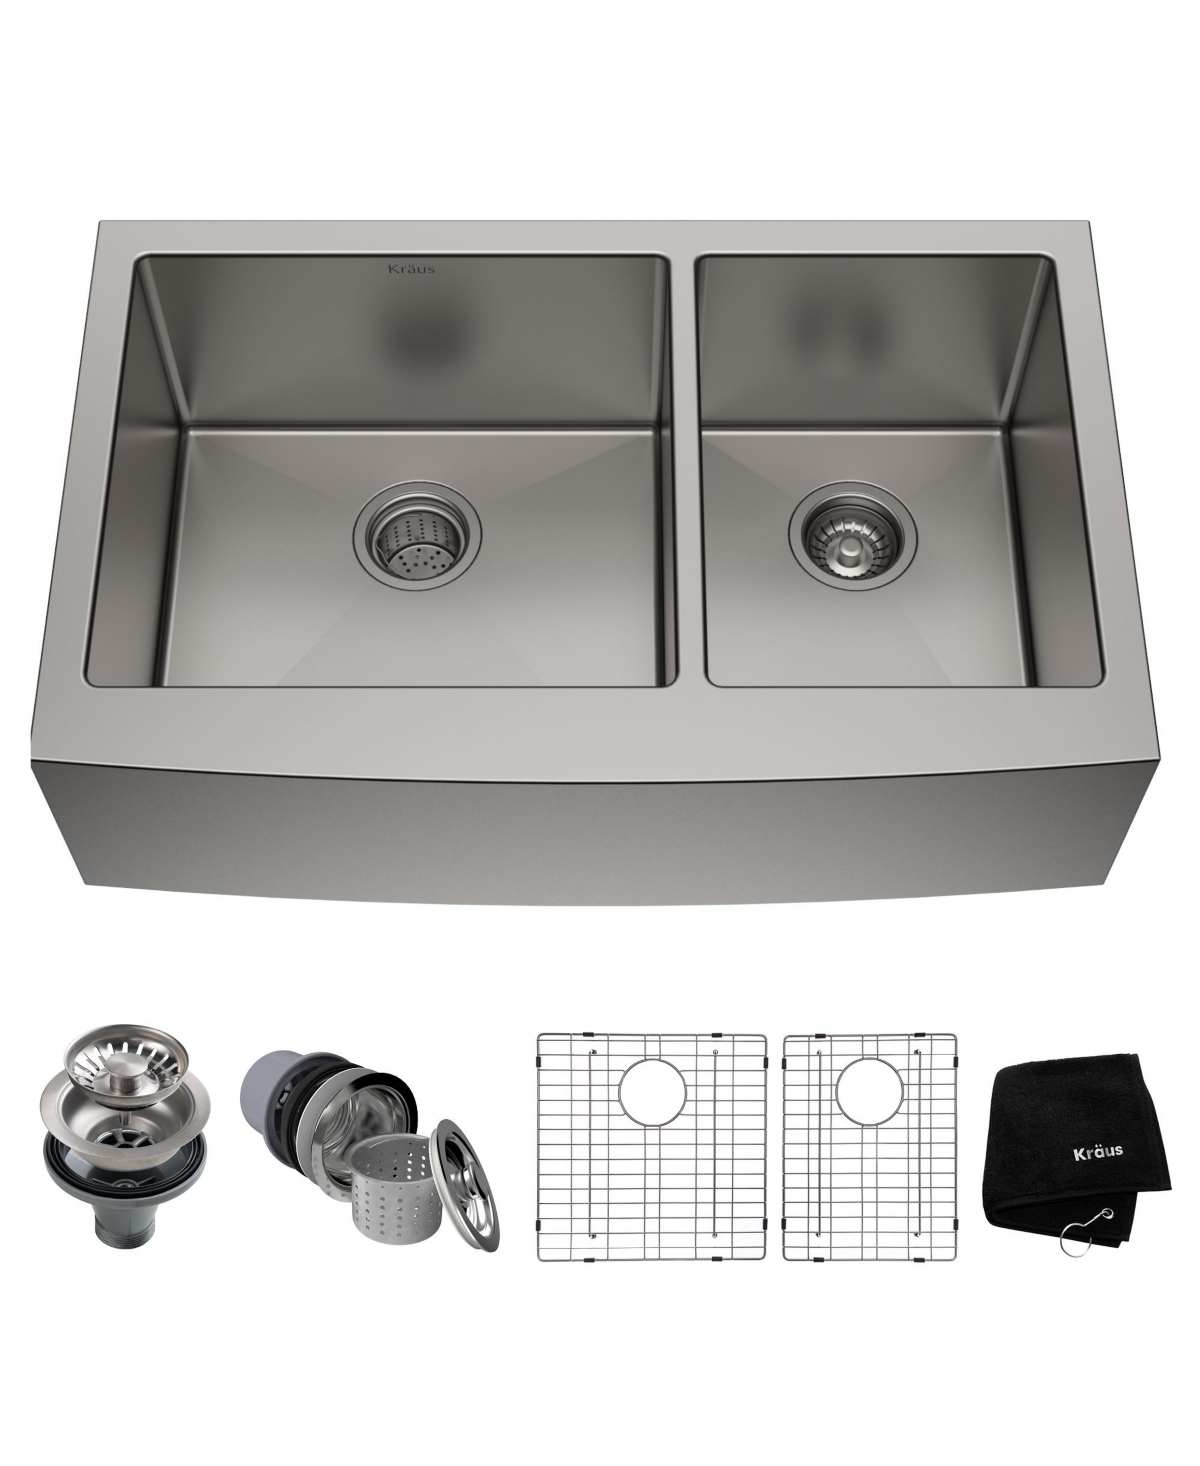 Standart Pro 36 in. 16 Gauge 60/40 Double Bowl Stainless Steel Farmhouse Kitchen Sink - Stainless steel